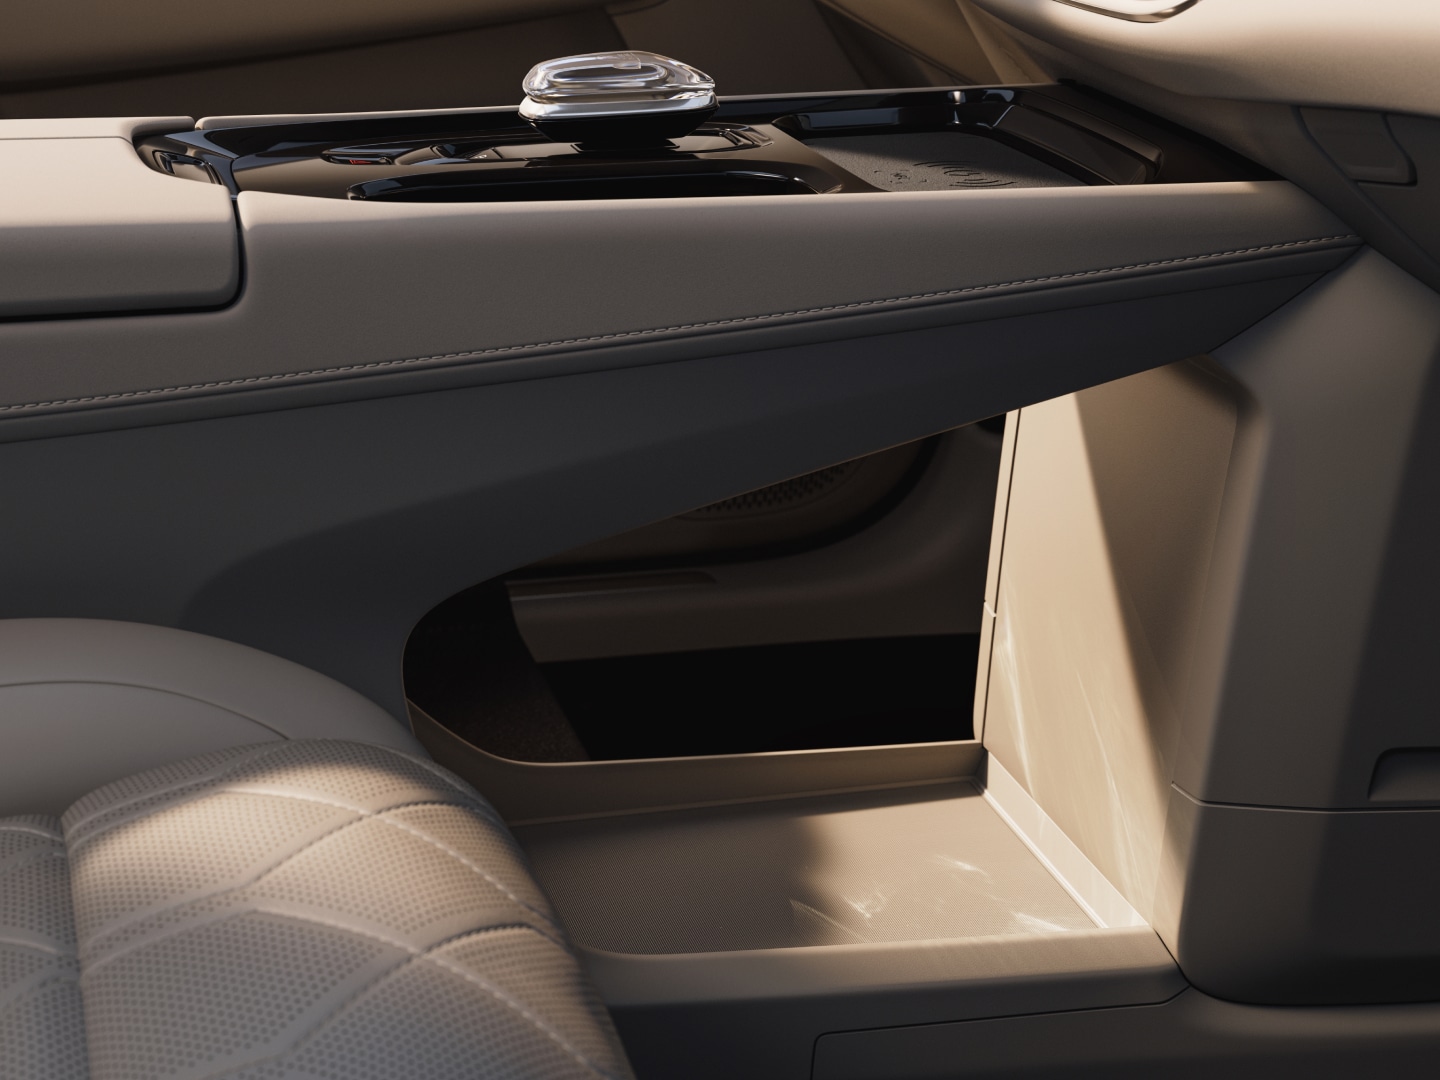 The spacious floor storage unit between the front seats of the Volvo EM90.